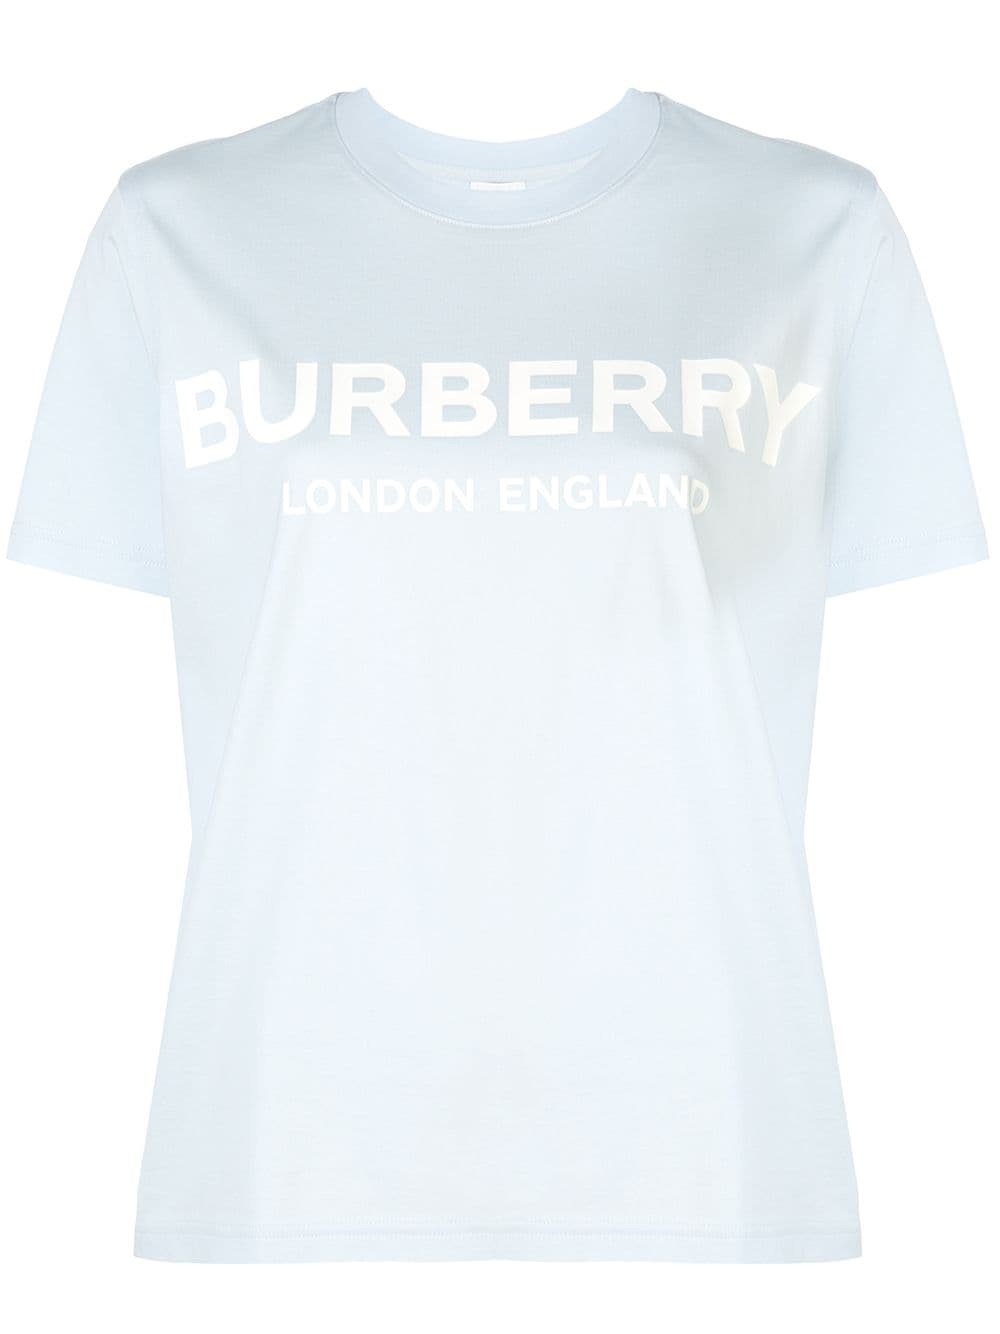 burberry his and hers shirts